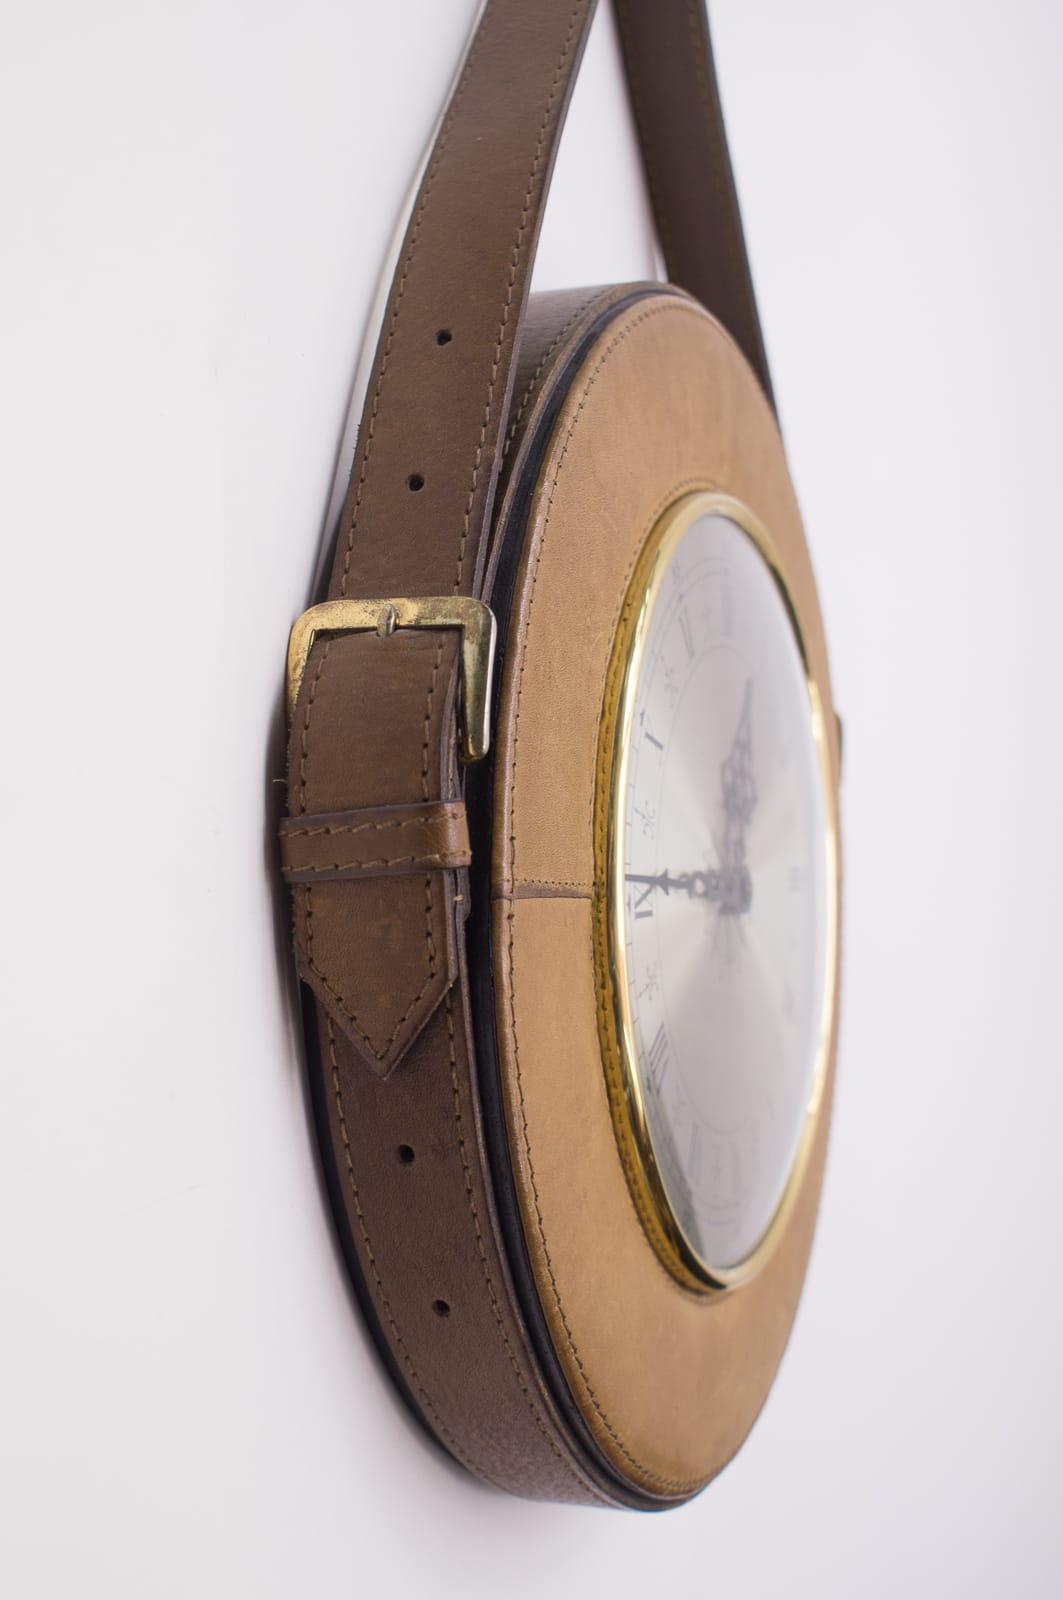 Mid-20th Century Mid-Century Modern Wall Clock in Leather and Brass, Germany